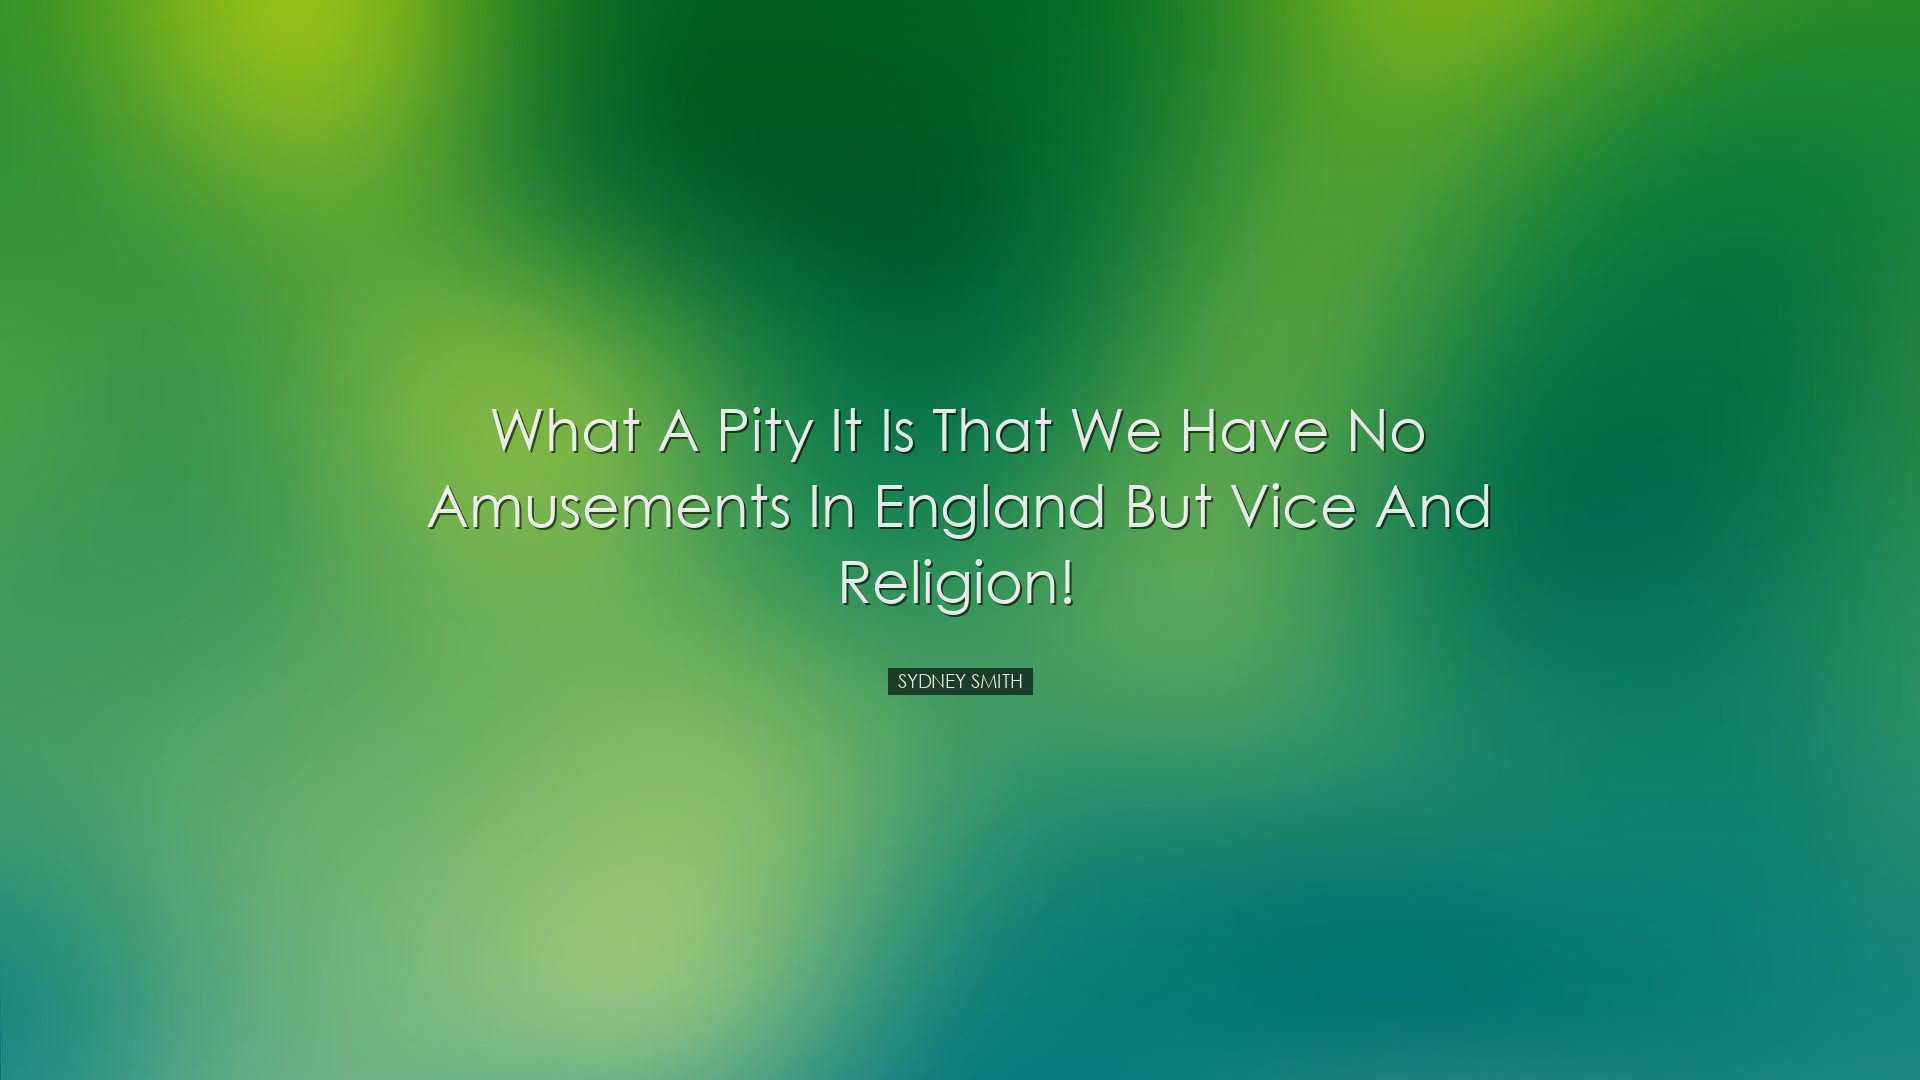 What a pity it is that we have no amusements in England but vice a